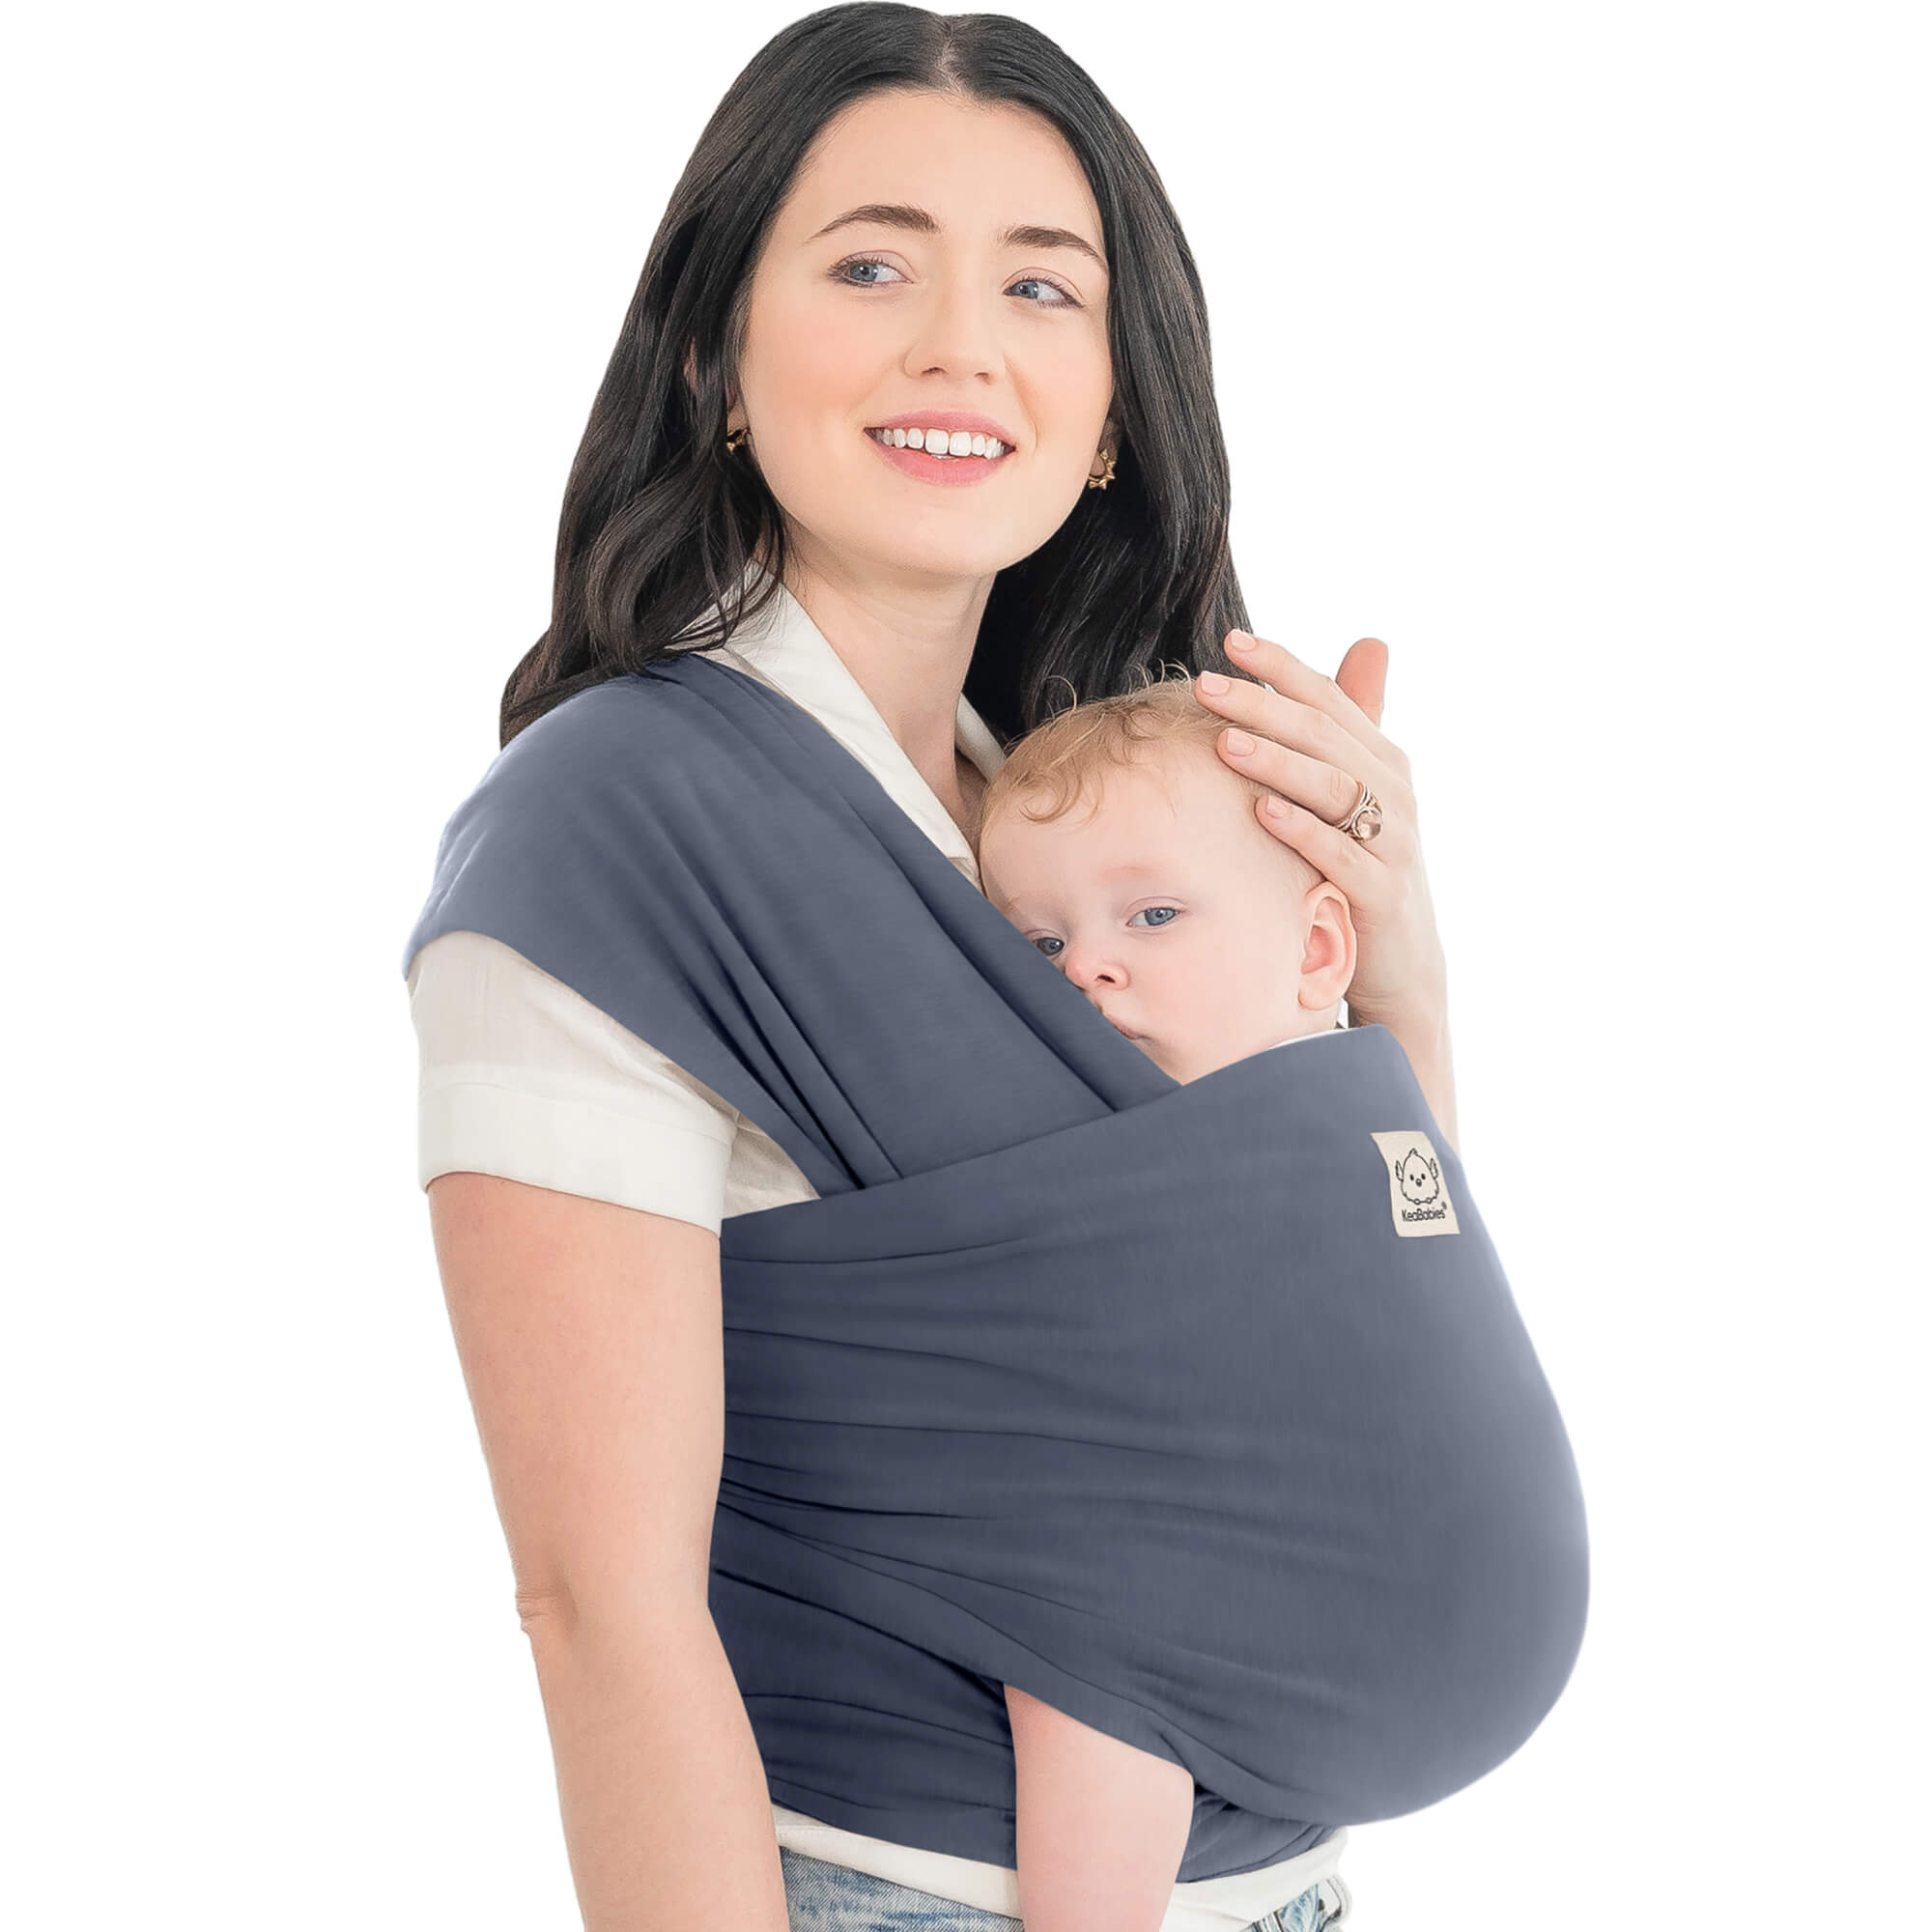 Boppy ComfyFit Baby Carrier Review – Bond Girl Glam